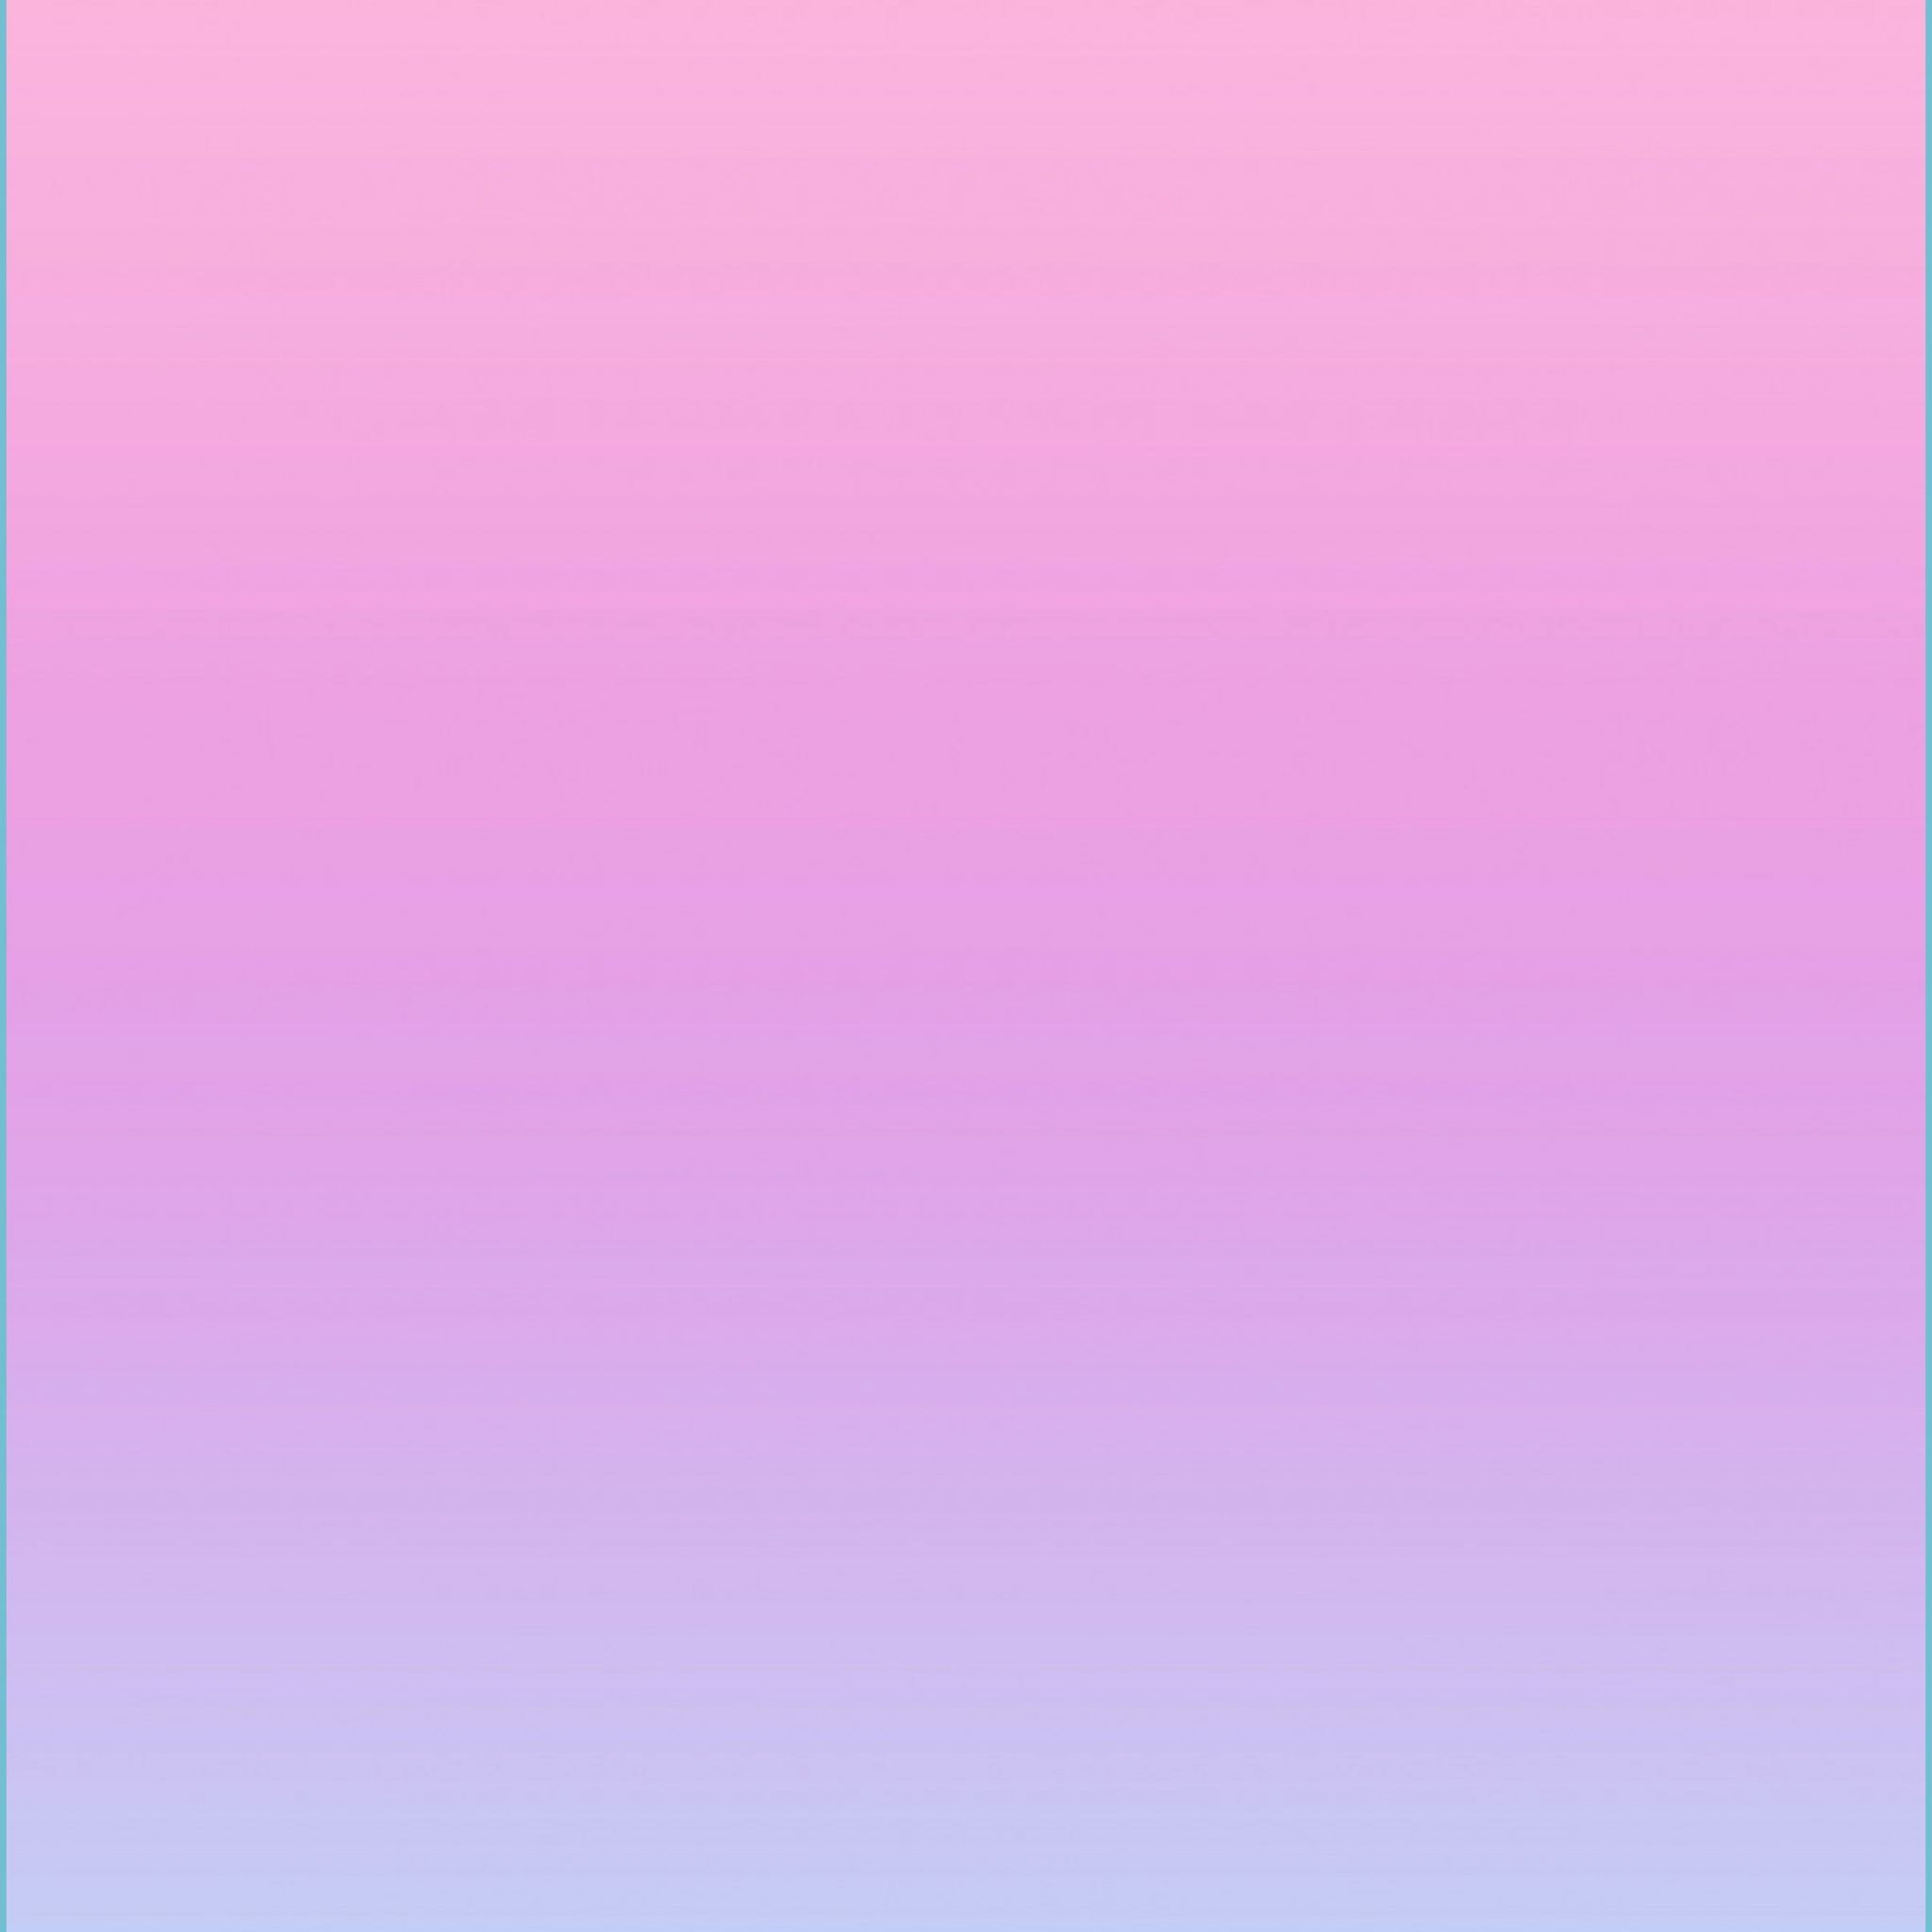 Pastel Purple And Blue Wallpapers - Wallpaper Cave